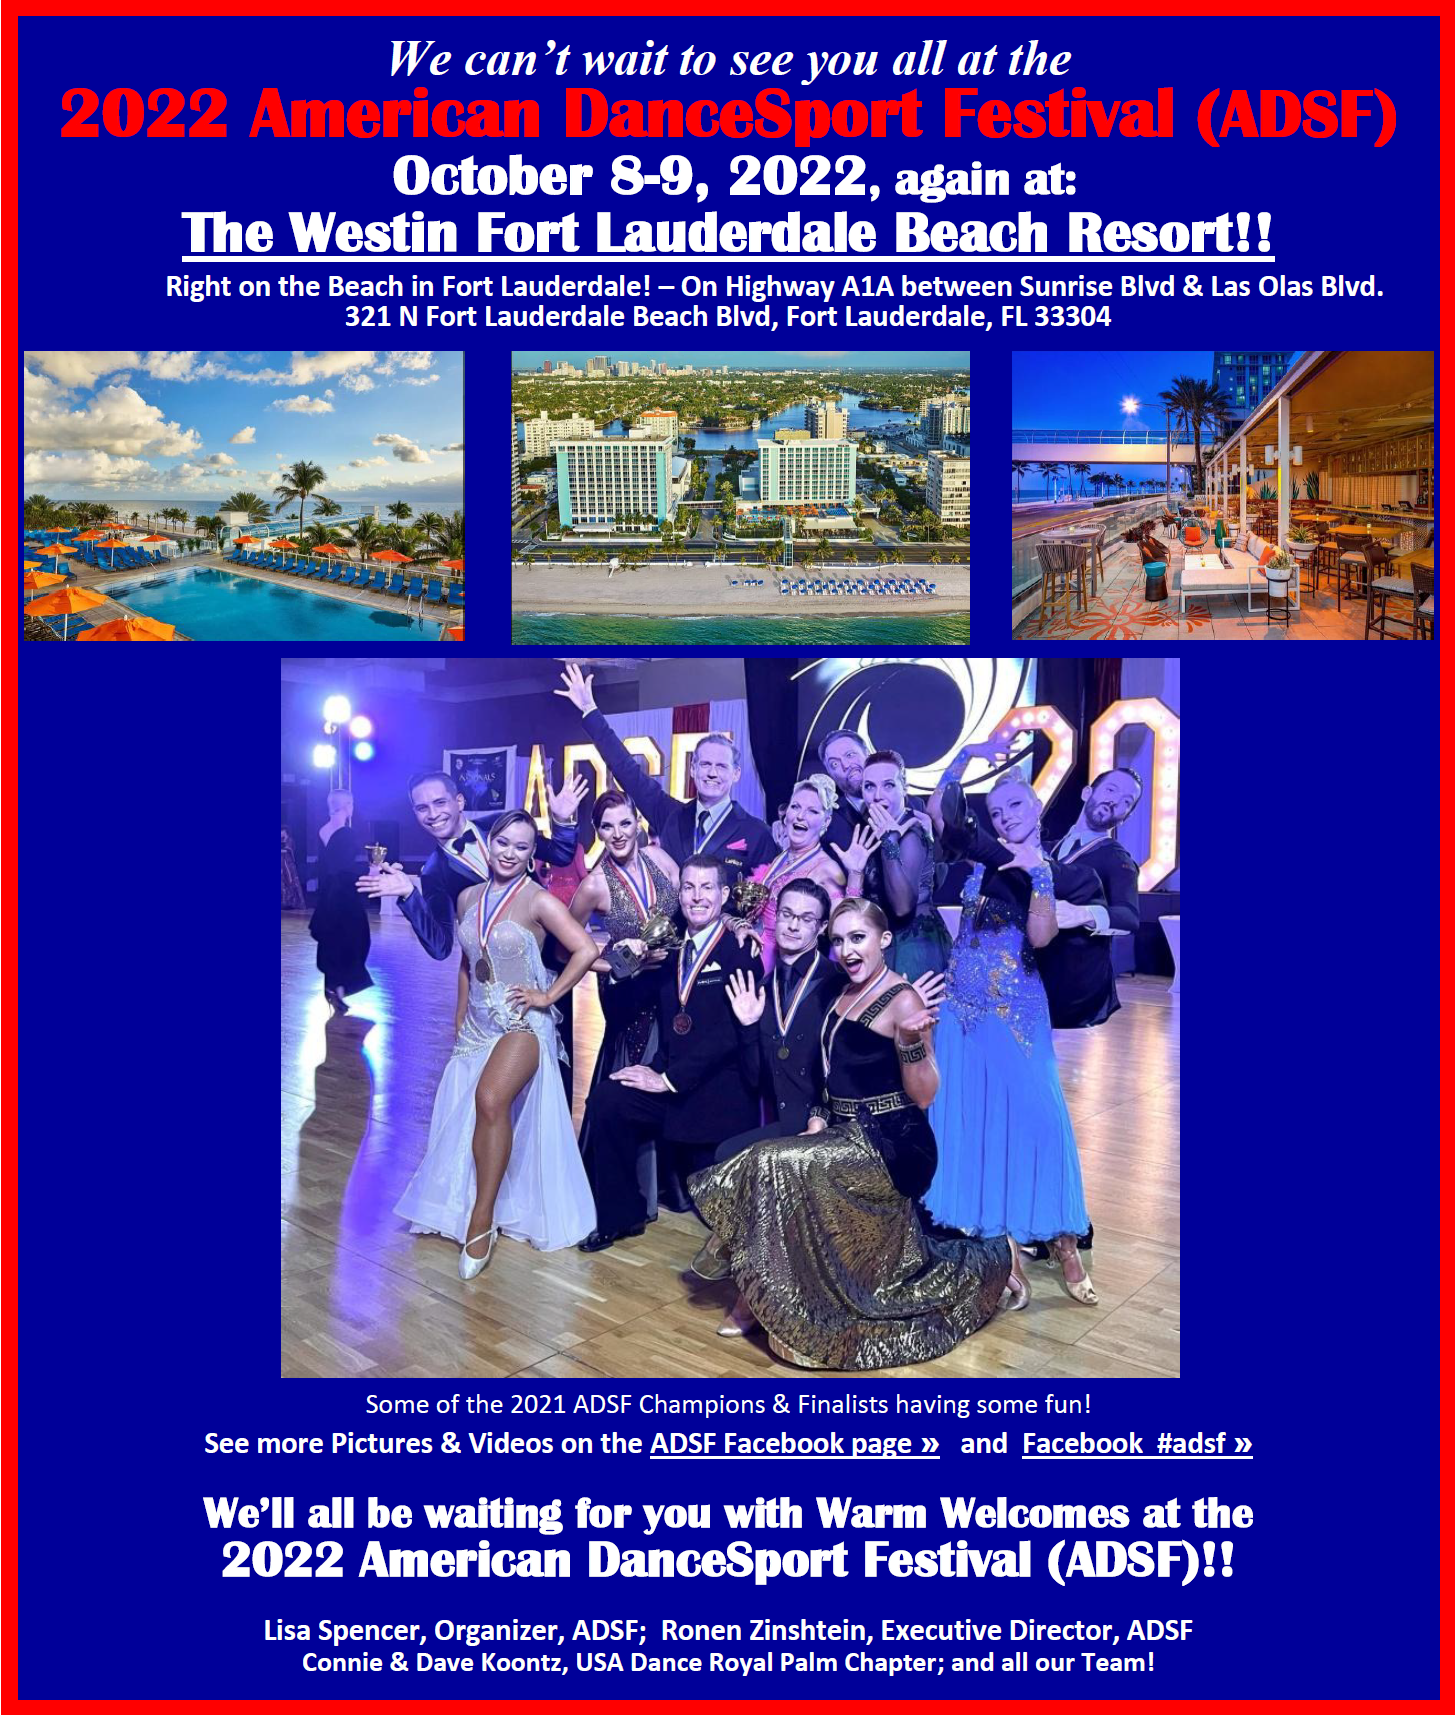 Save the Dates - October 8-9, 2022 - American DanceSport Festival (ADSF) - 2nd Annual Merged Competition with the Royal Palm DanceSport Championships!